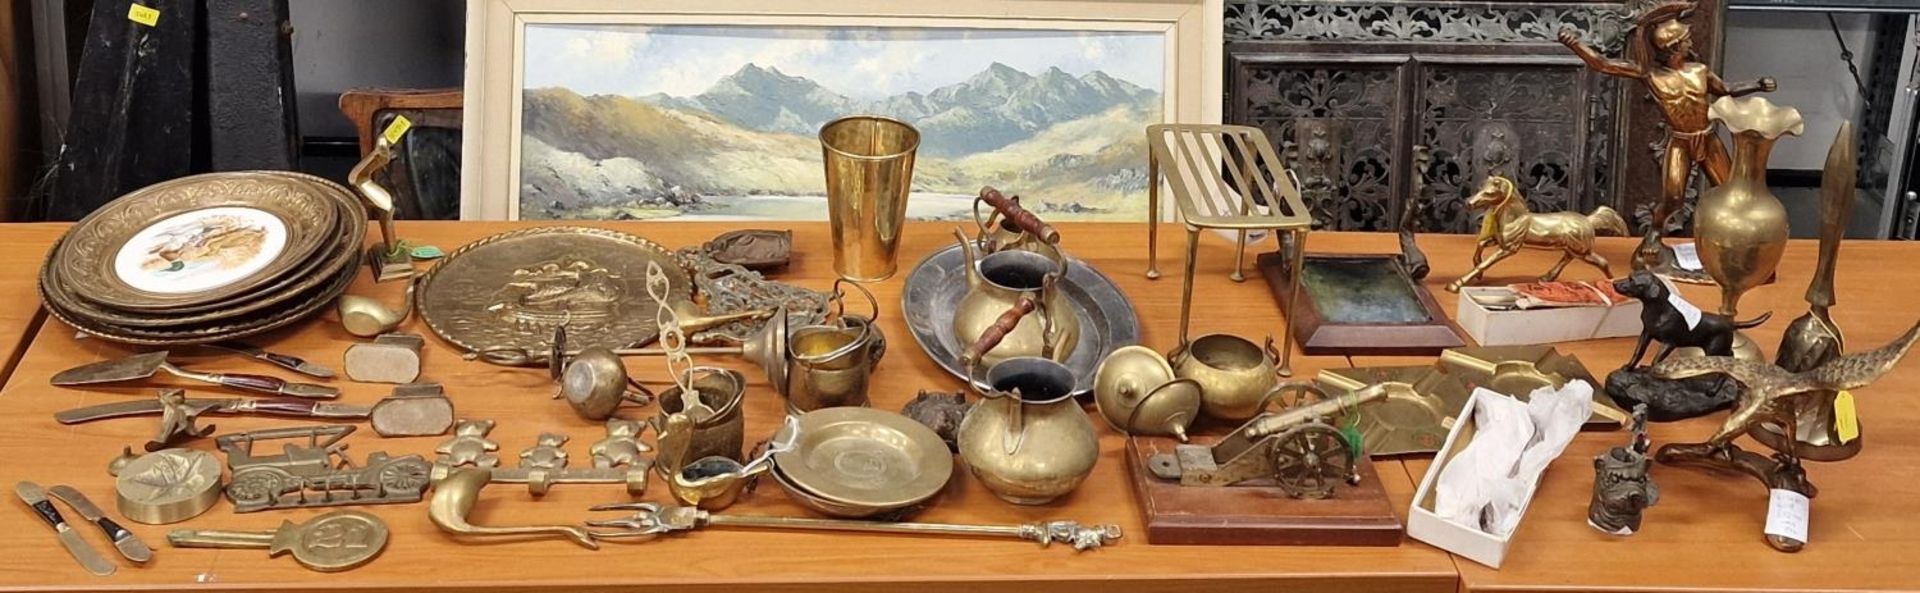 Large collection of brass and other metalware items.